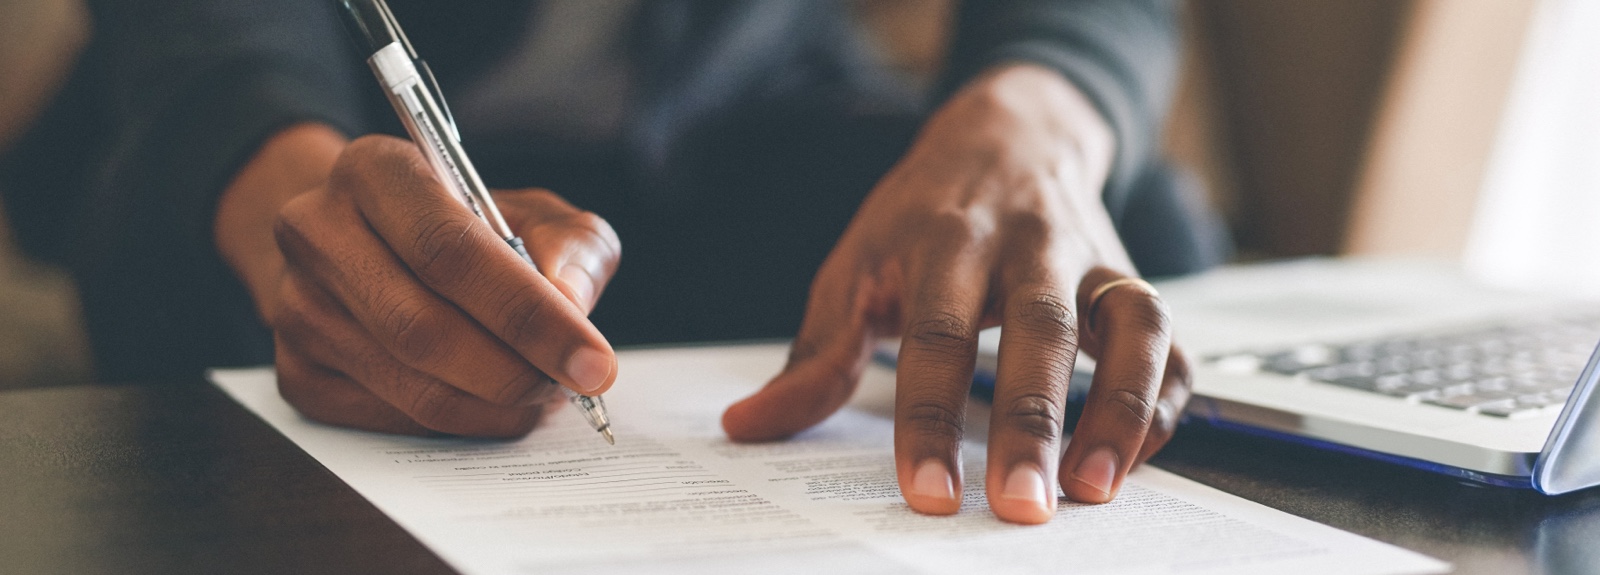 Close up of a person's hands signing a document